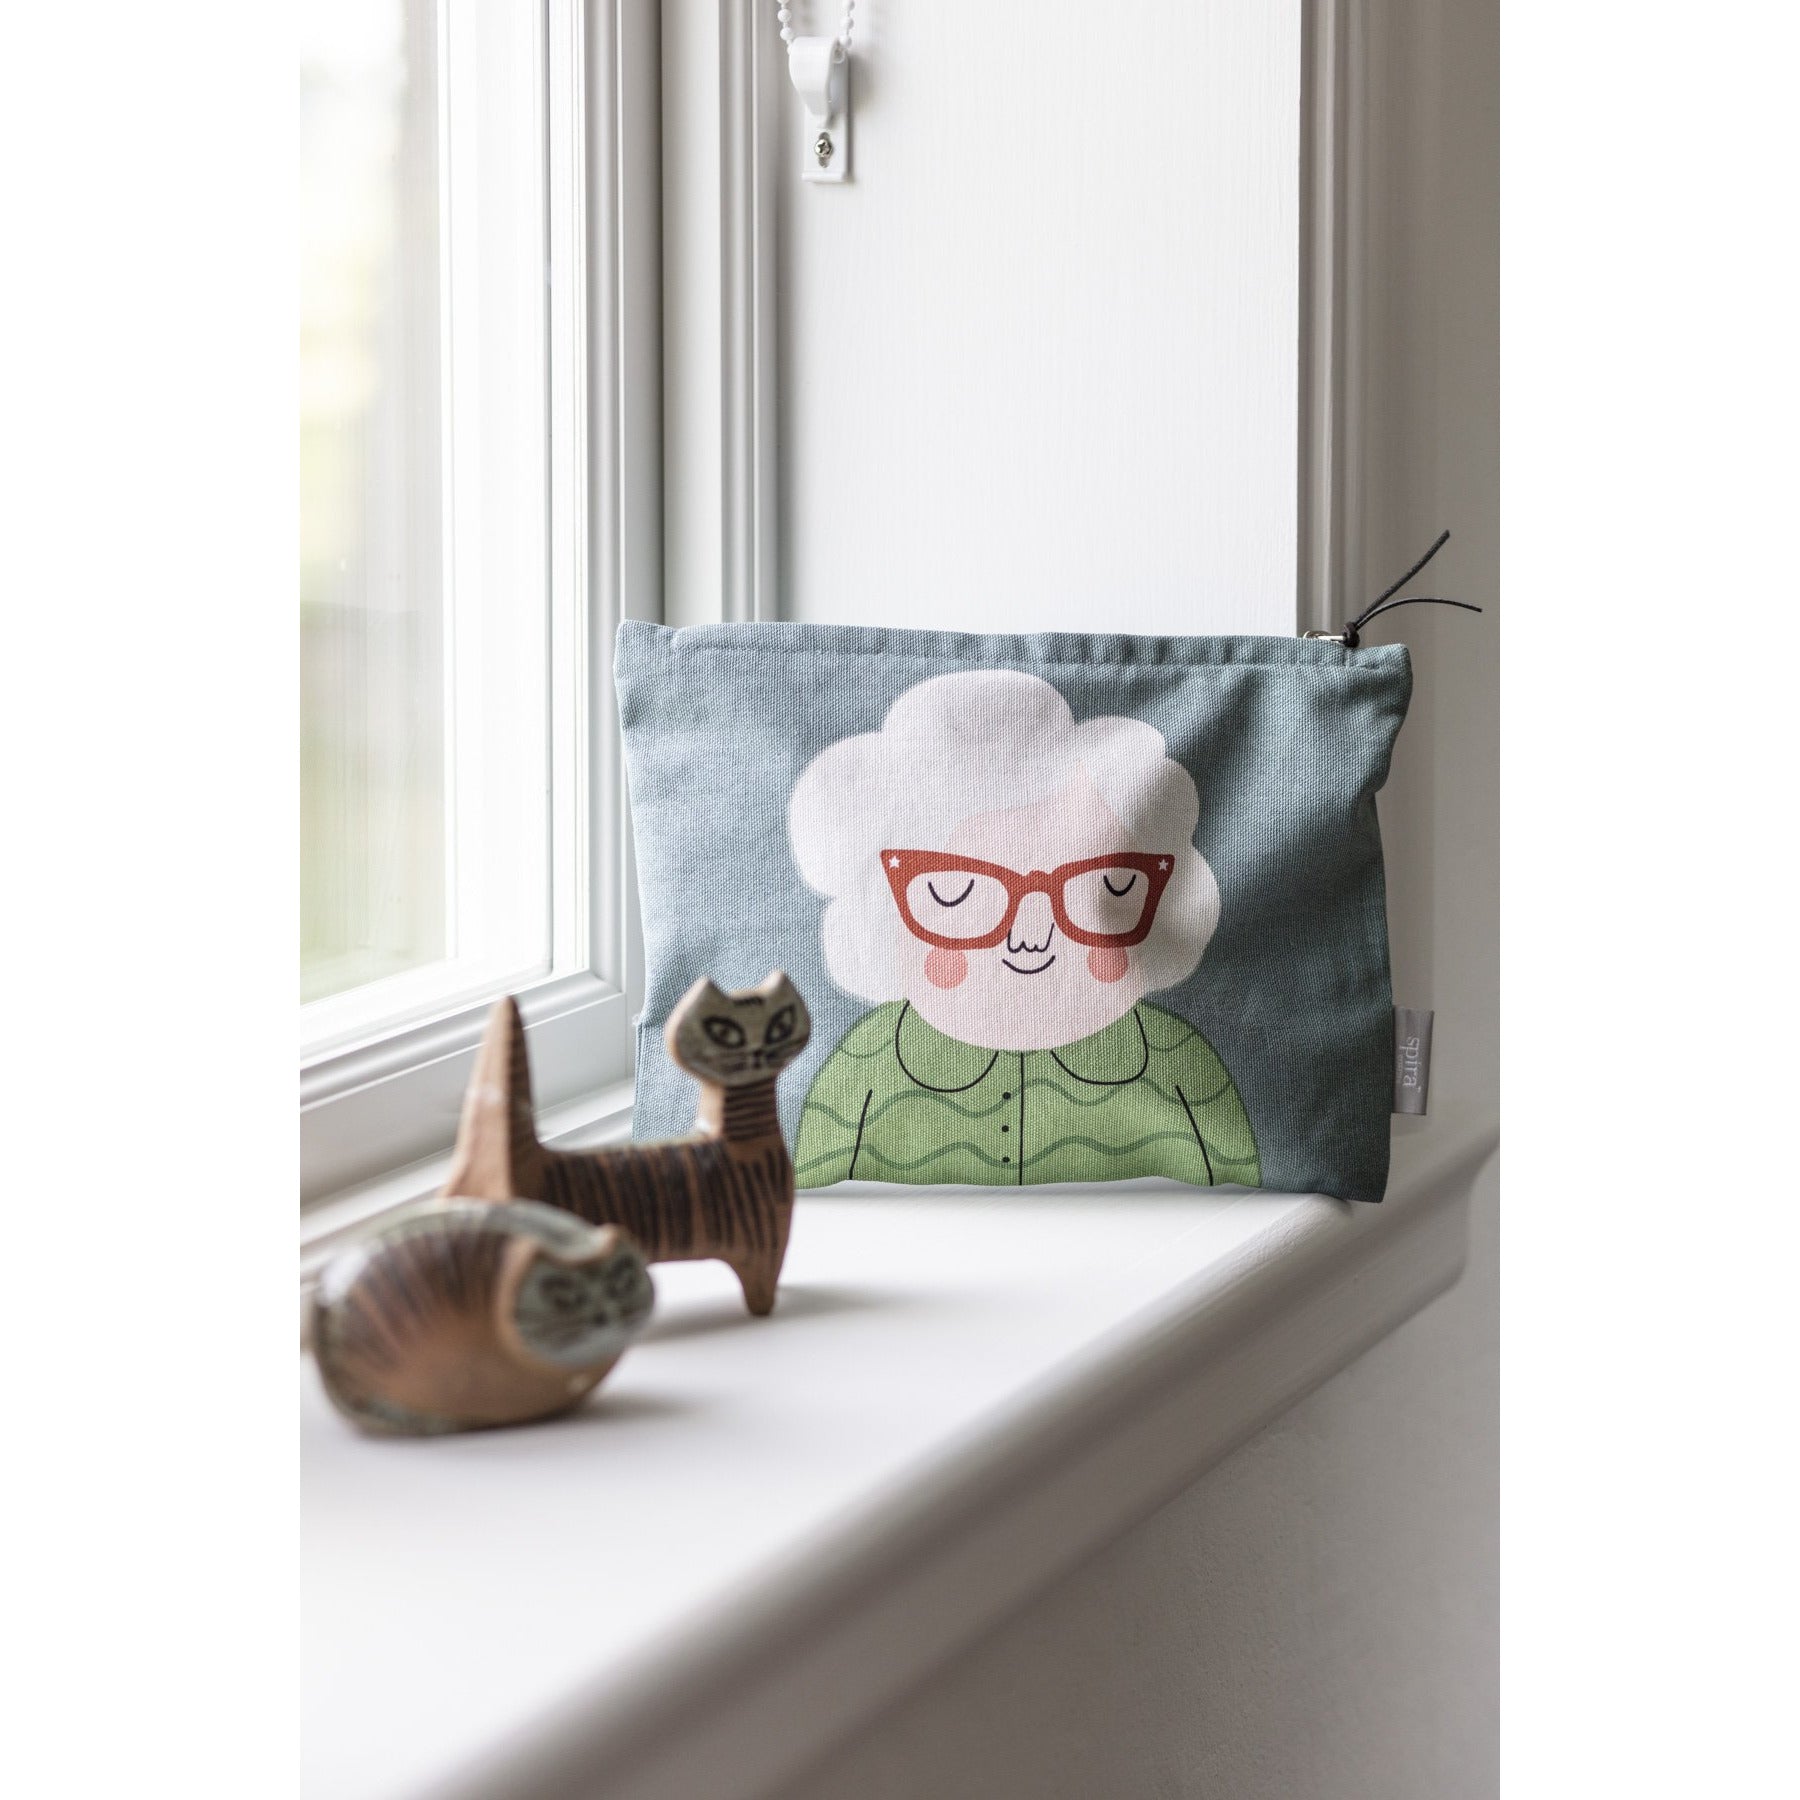 Green gray zipped toiletry bag with women's face with white hair, terra-cotta colored glasses and green shirt. Bag leans against a white windowsill next to two carved wooden cats.